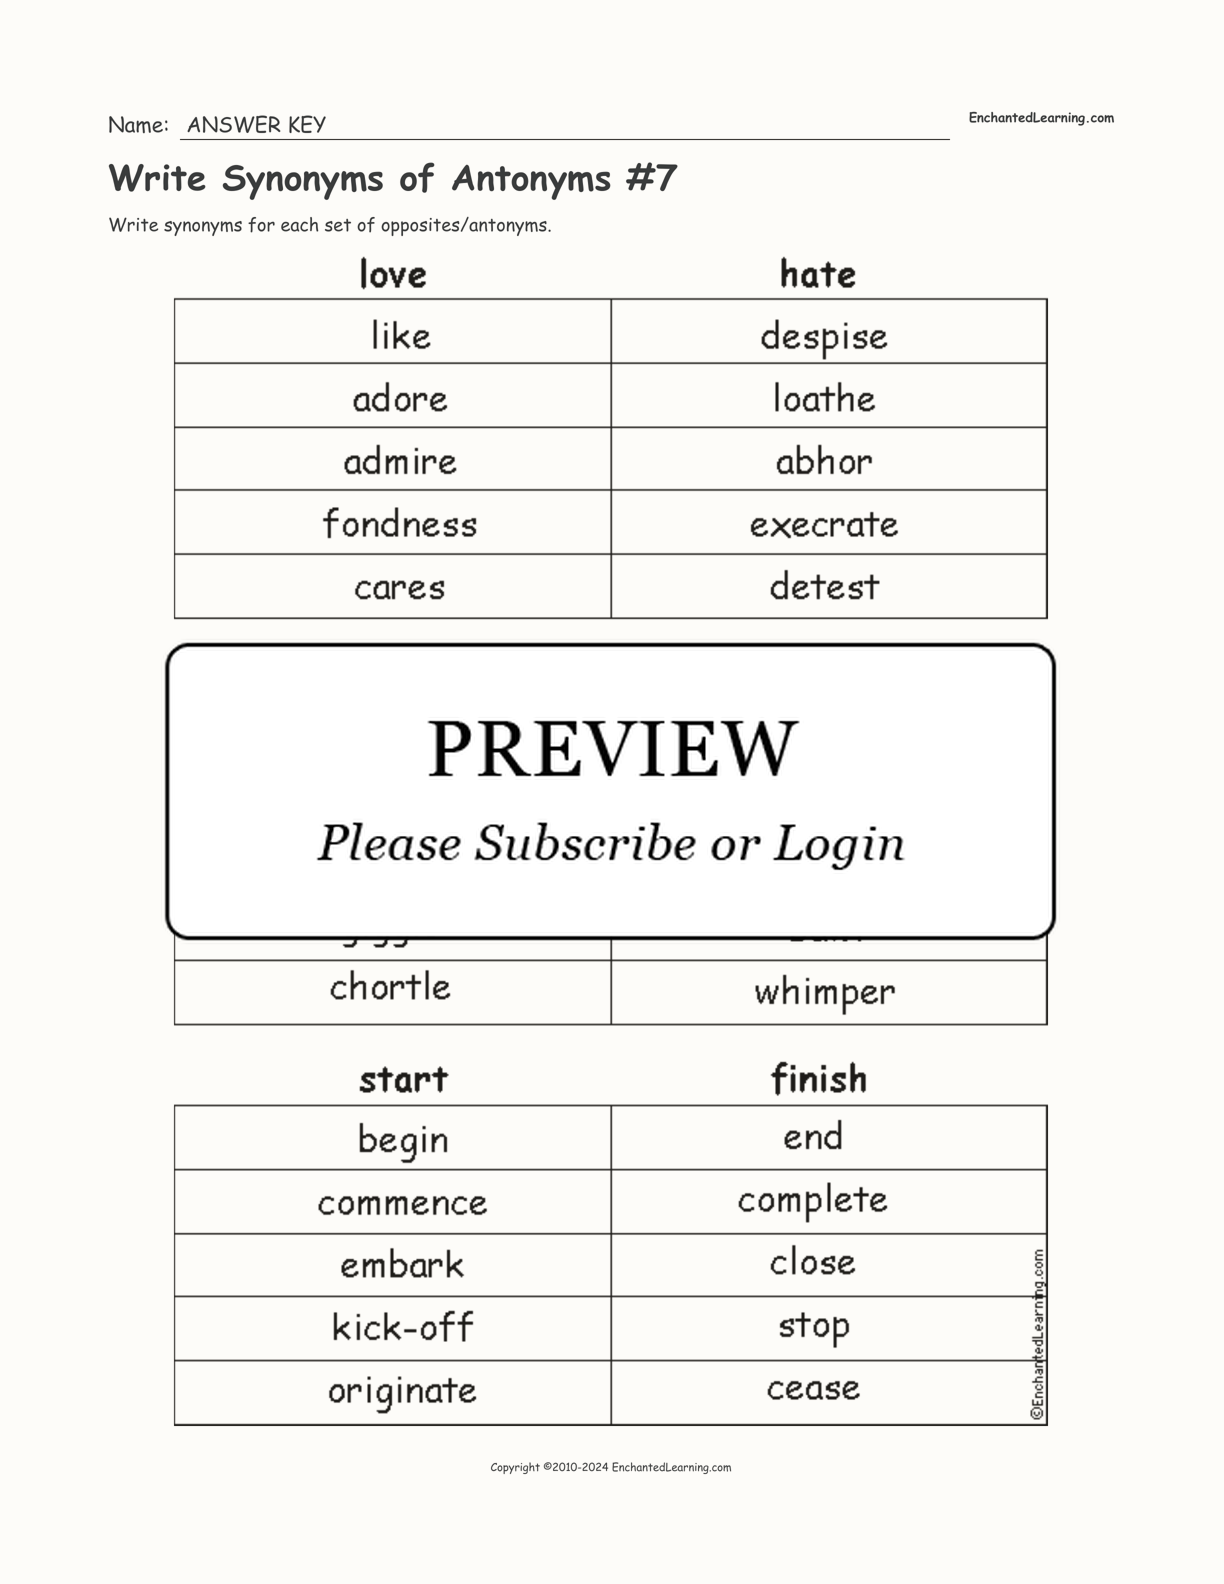 Write Synonyms of Antonyms #7 interactive worksheet page 2